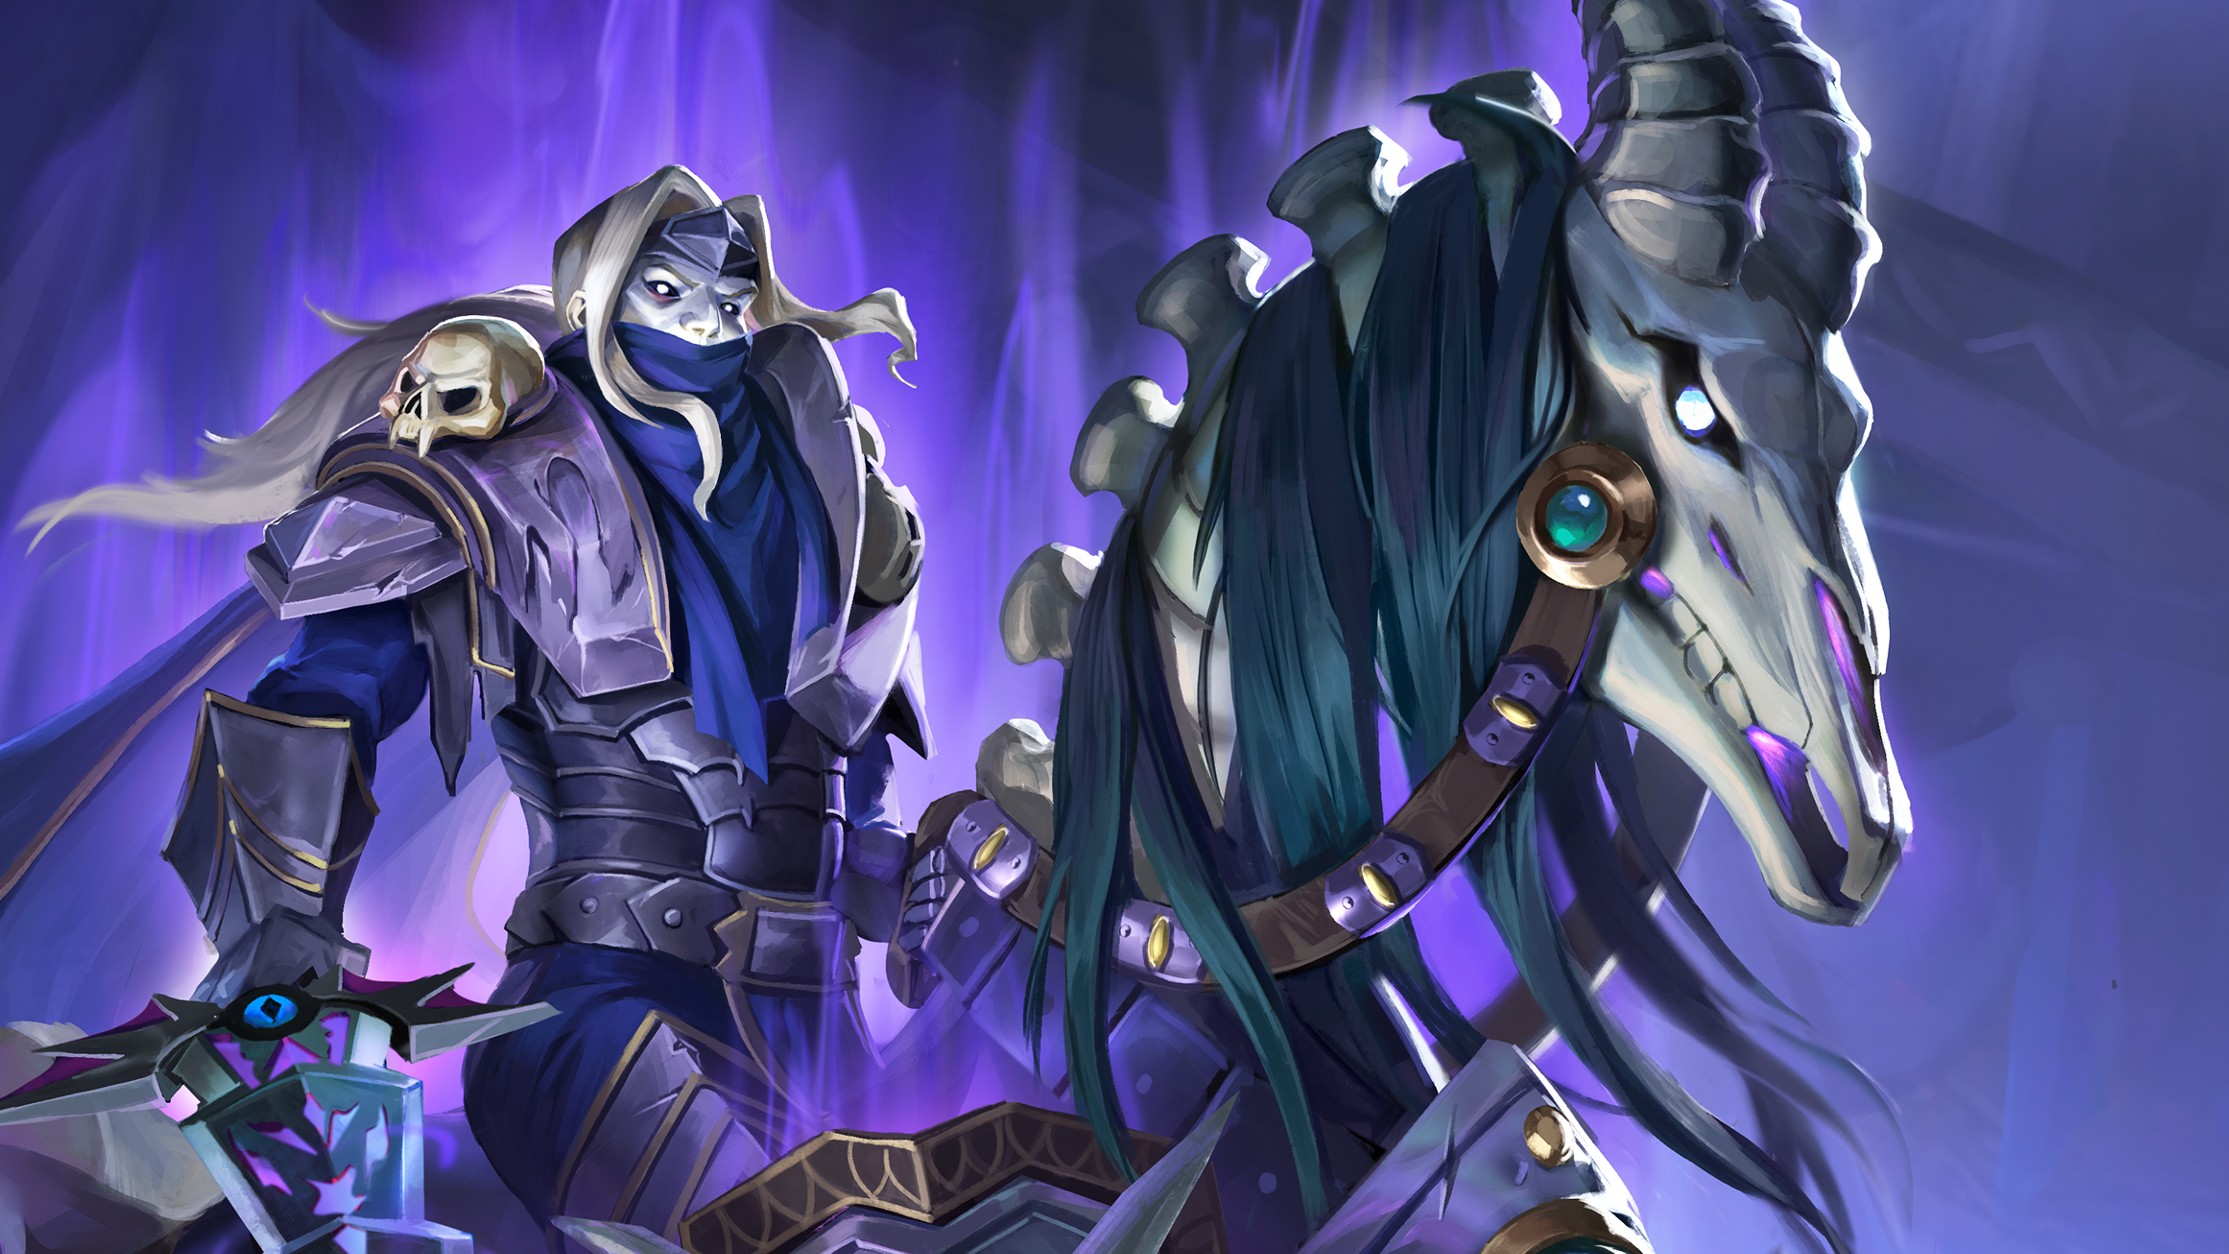  Hearthstone's new Naxxramas miniset launches next week and we have a Legendary card to reveal 